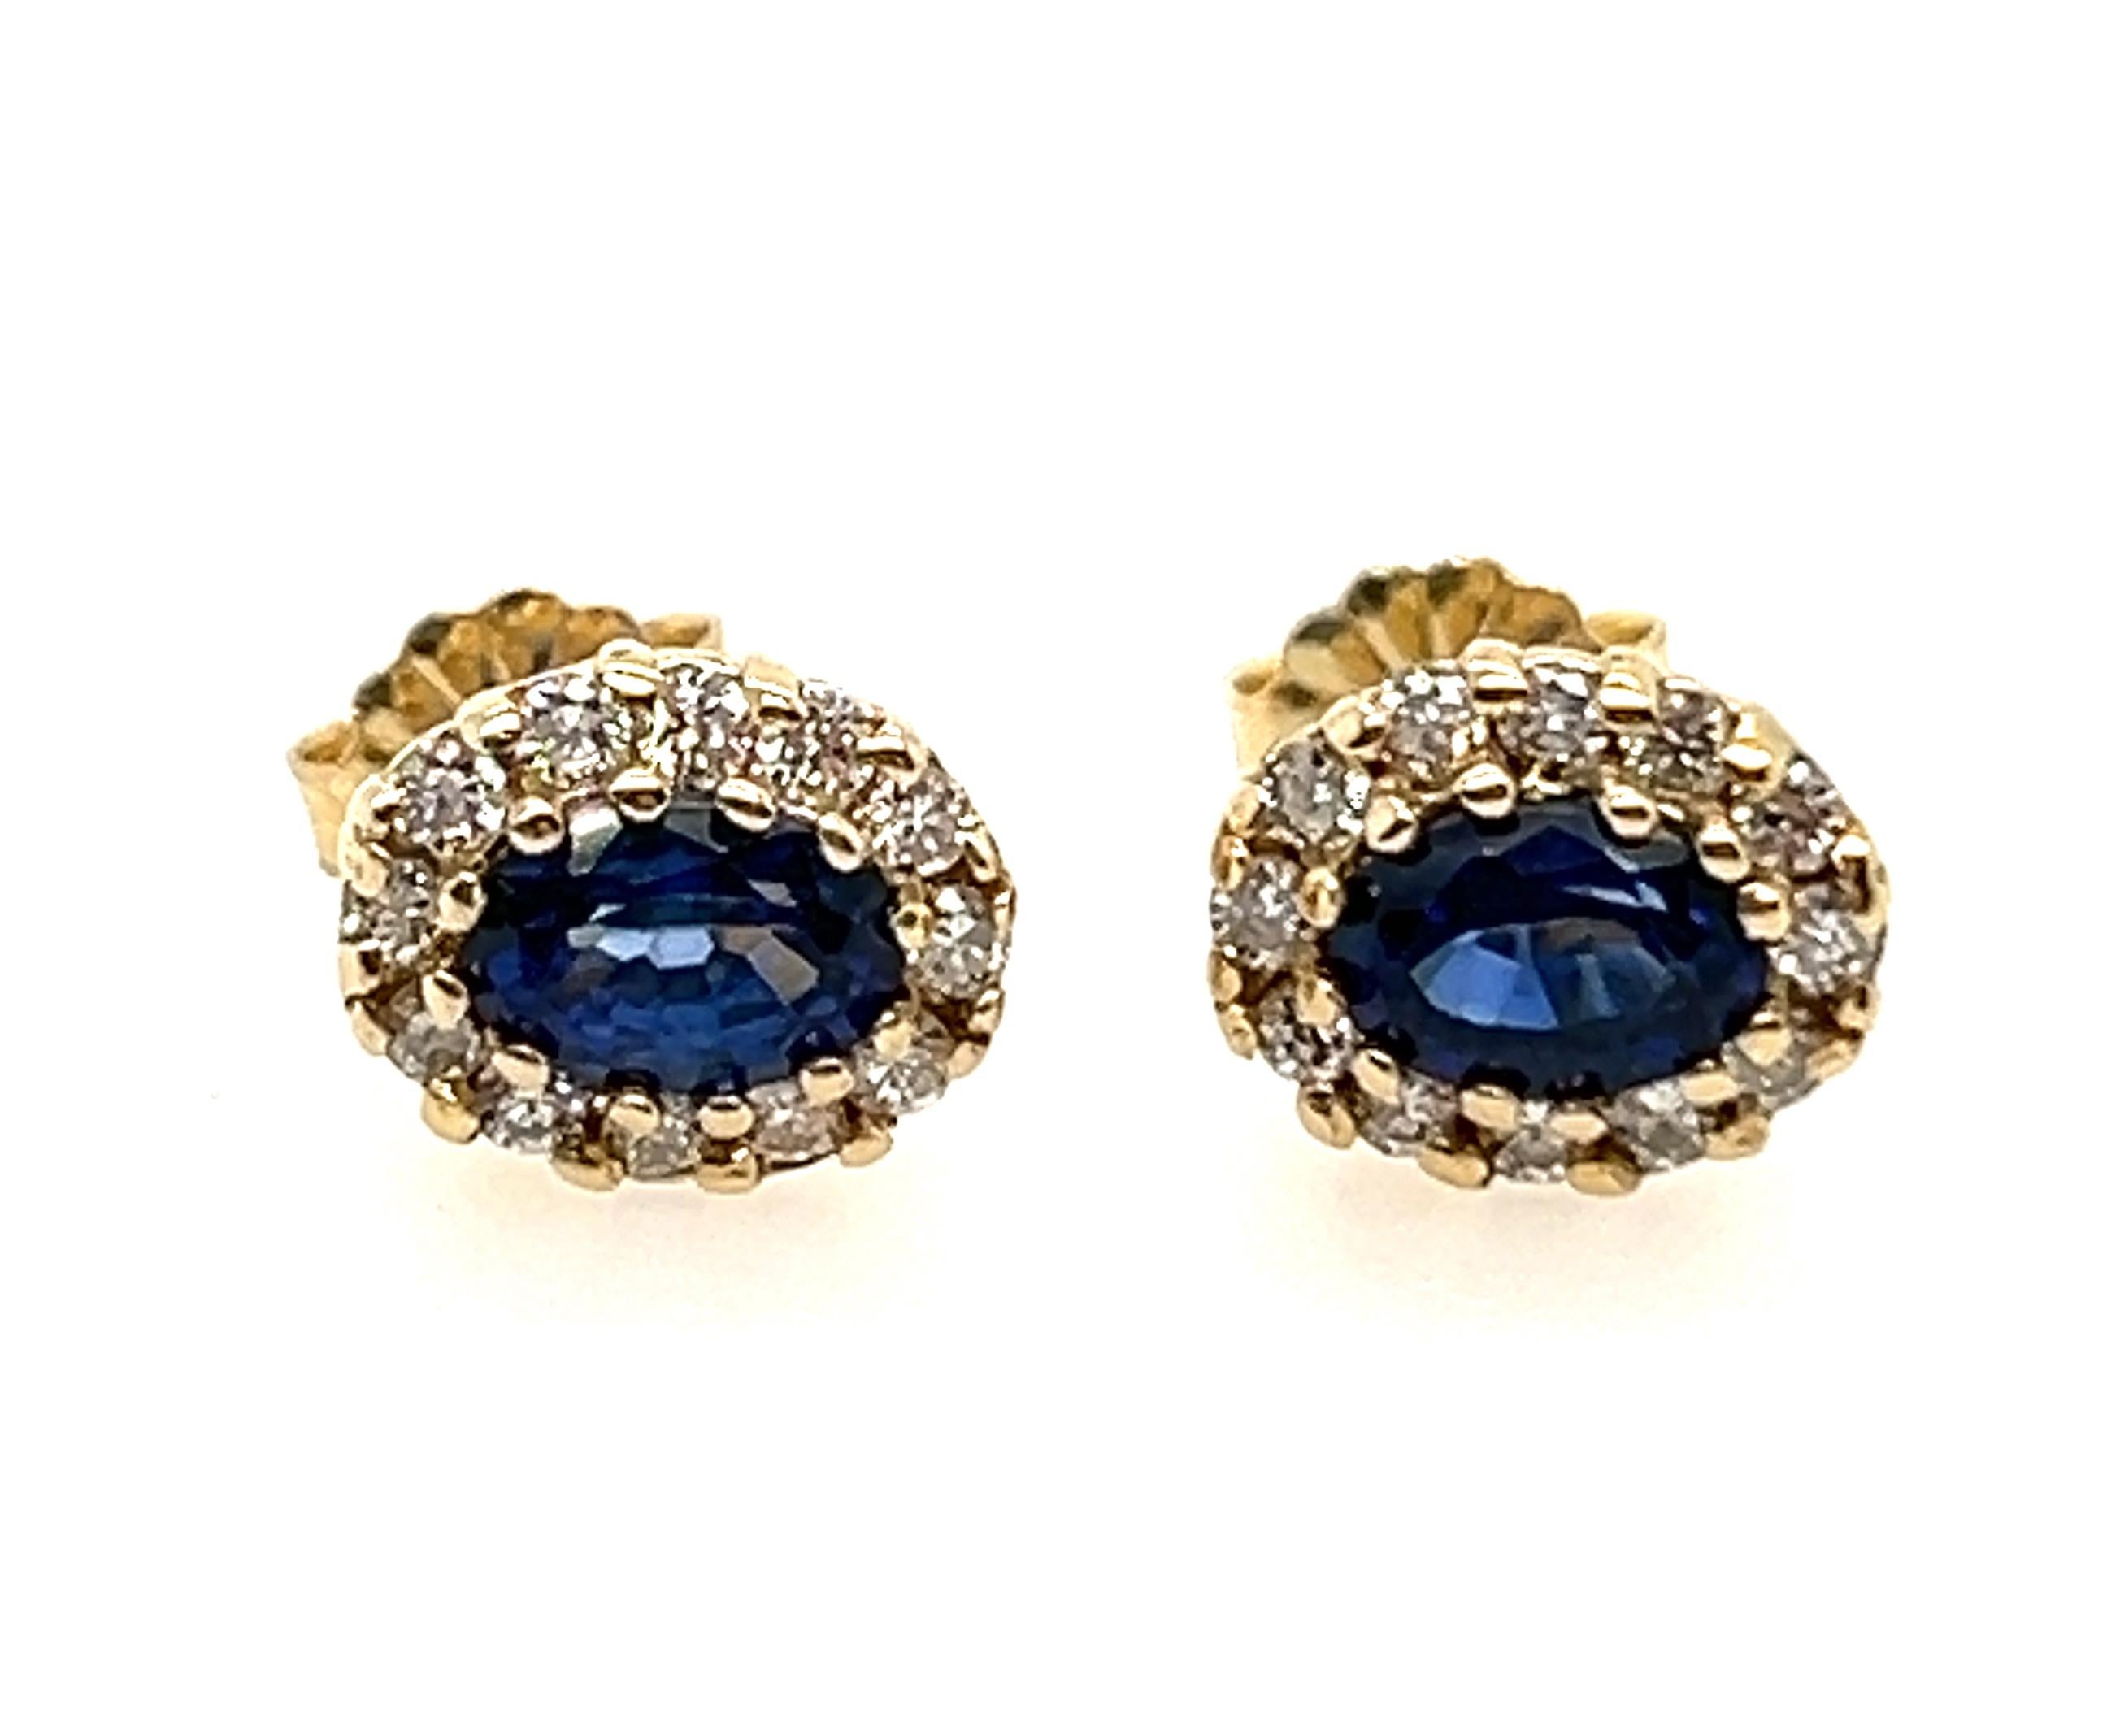 Oval Cut Brand New Sapphire Diamond Stud Halo Earrings 1.83ct 14K Yellow Gold For Sale